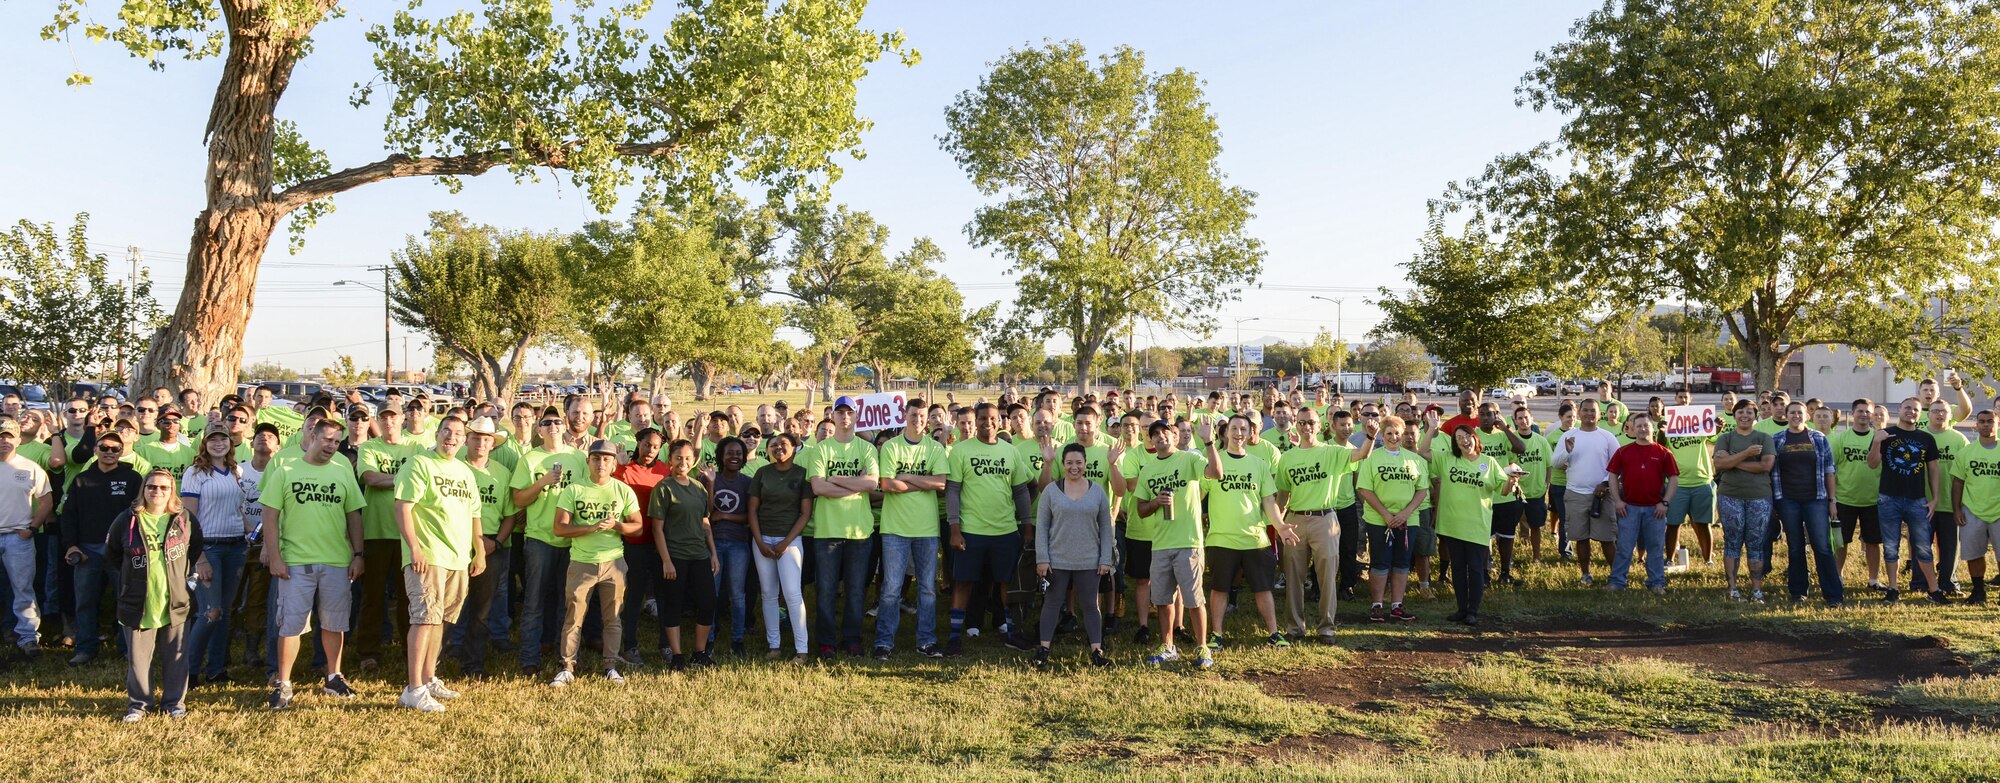 Day of Caring volunteers pose for a group photo at Alameda Park in Alamogordo, N.M. on Sept. 9, 2016. The annual Day of Caring volunteer event, hosted by The United Way of Otero County, helps disabled individuals and senior citizens. (U.S. Air Force photo by Airman Alexis P. Docherty)